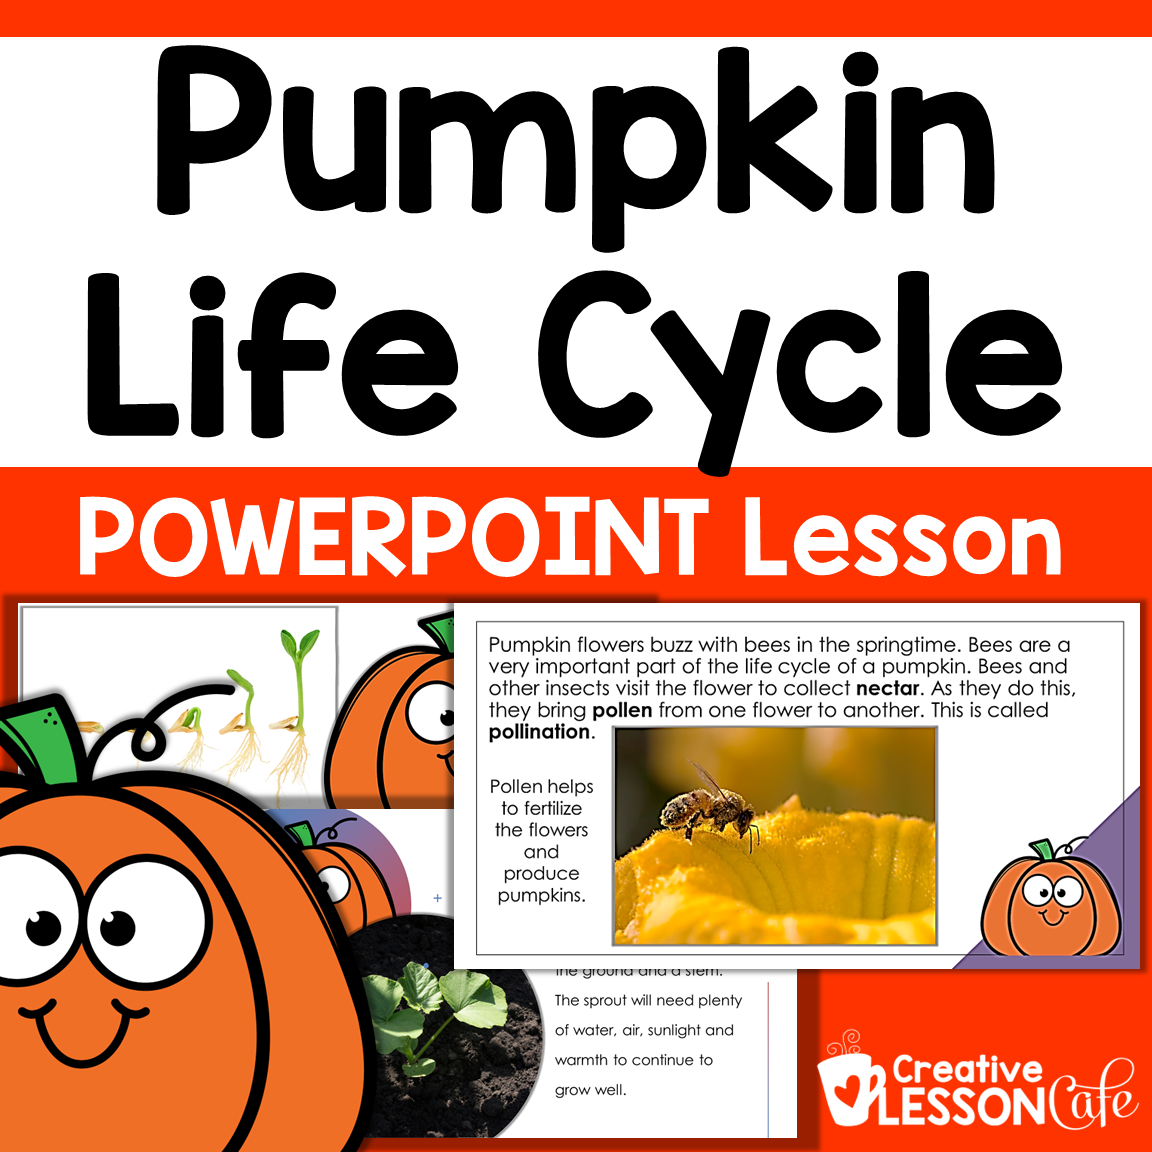 The Life Cycle of a Pumpkin PowerPoint Lesson